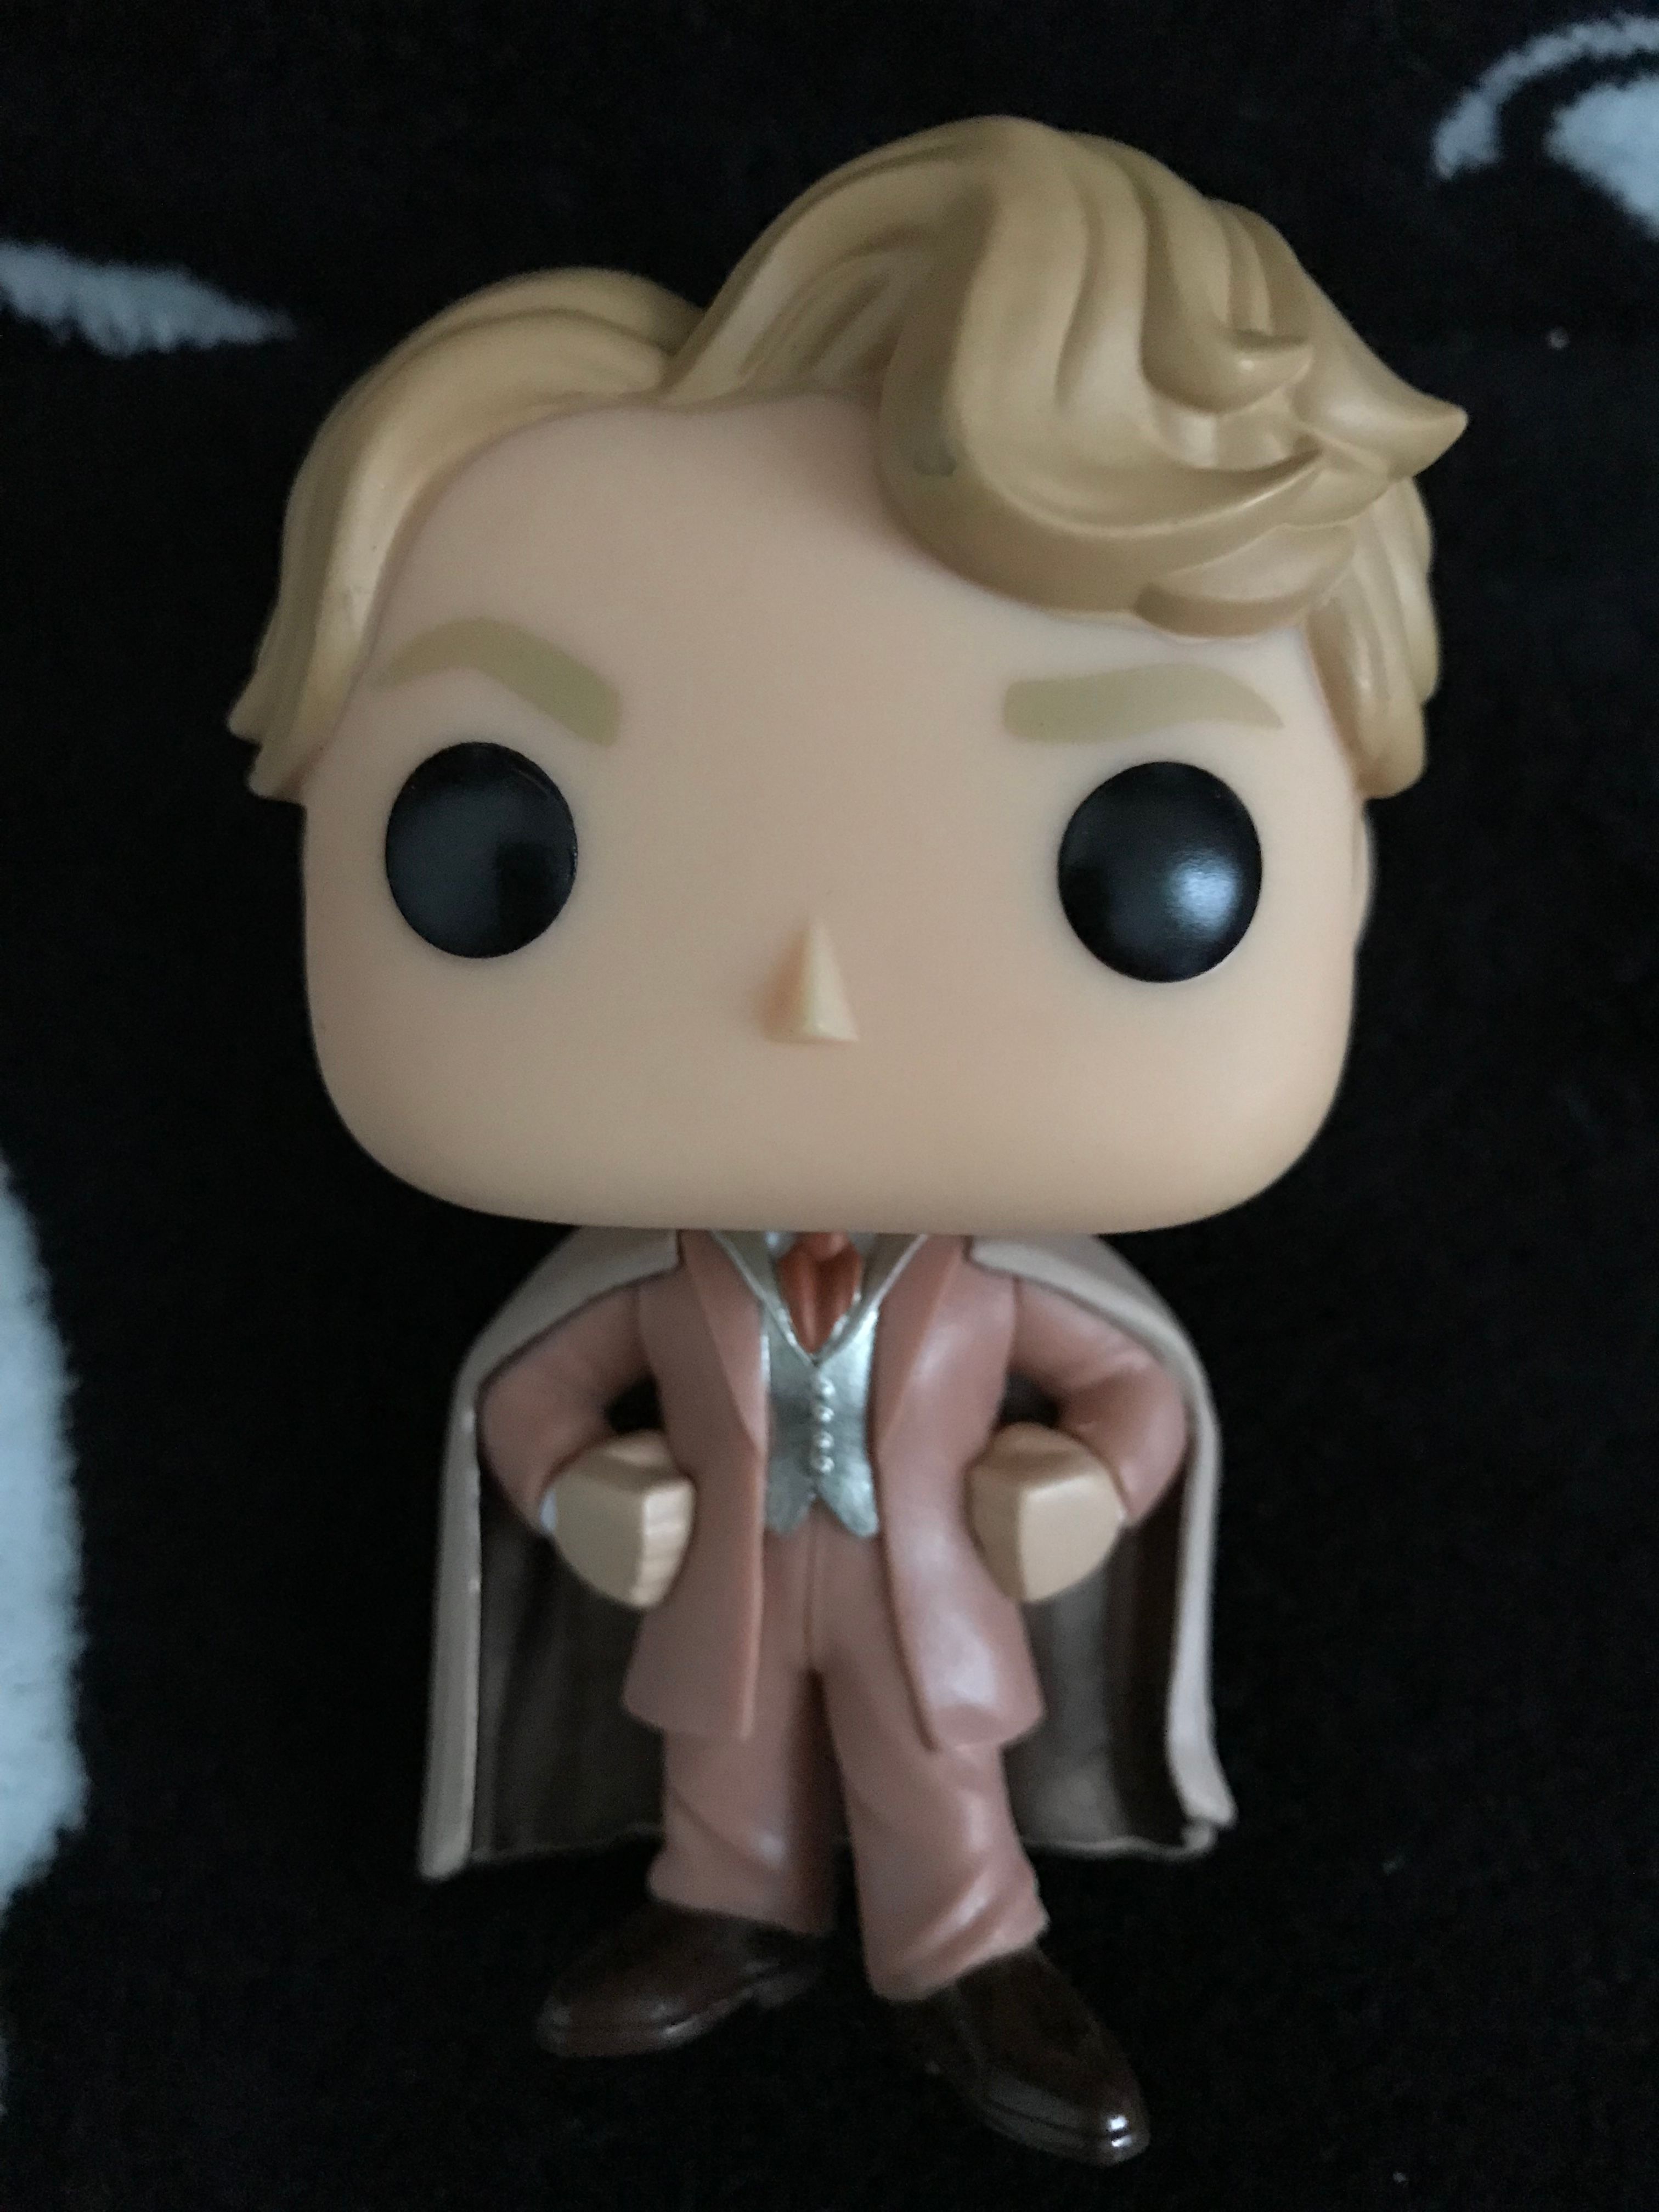 Gilderoy Lockhart in all his pompousness